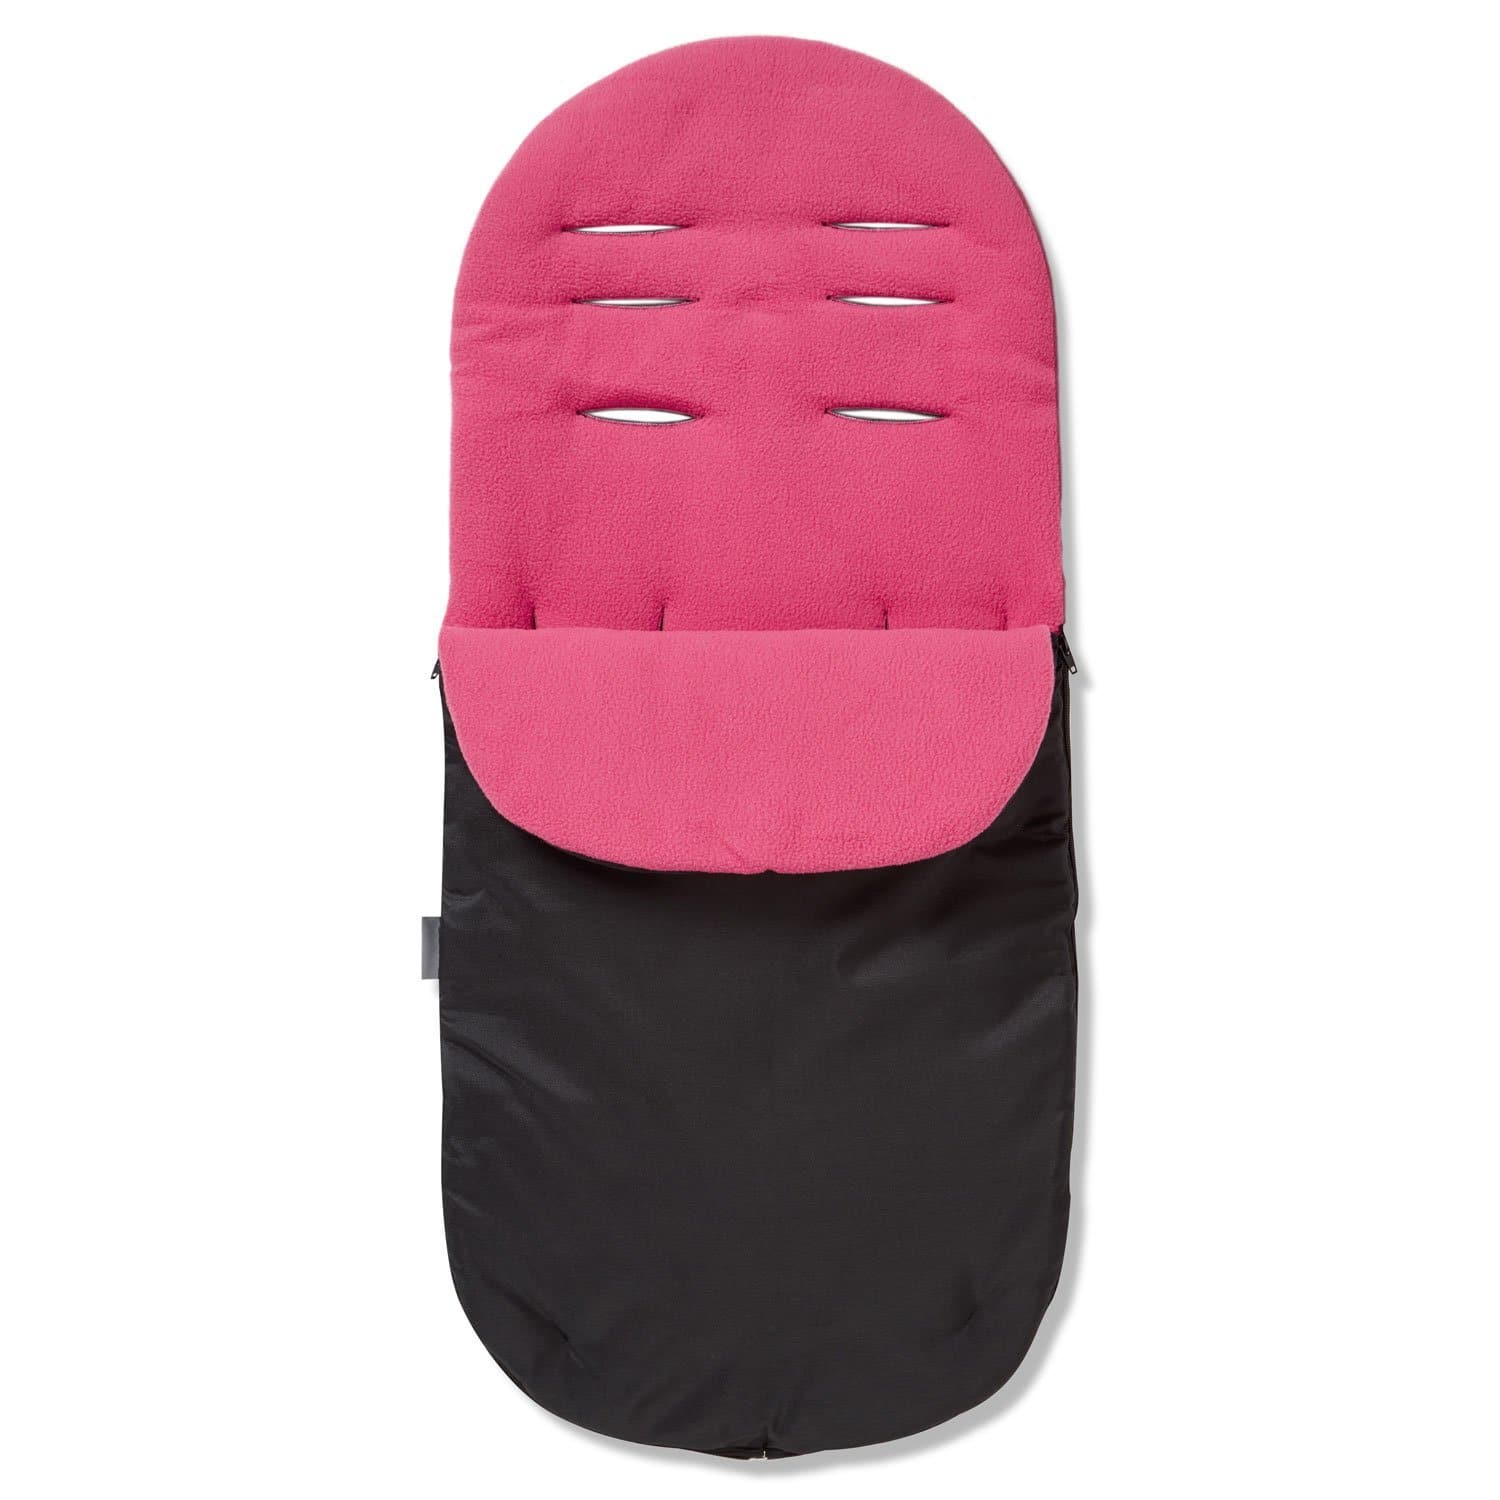 Footmuff / Cosy Toes Compatible with Tippitoes - Dark Pink / Fits All Models | For Your Little One